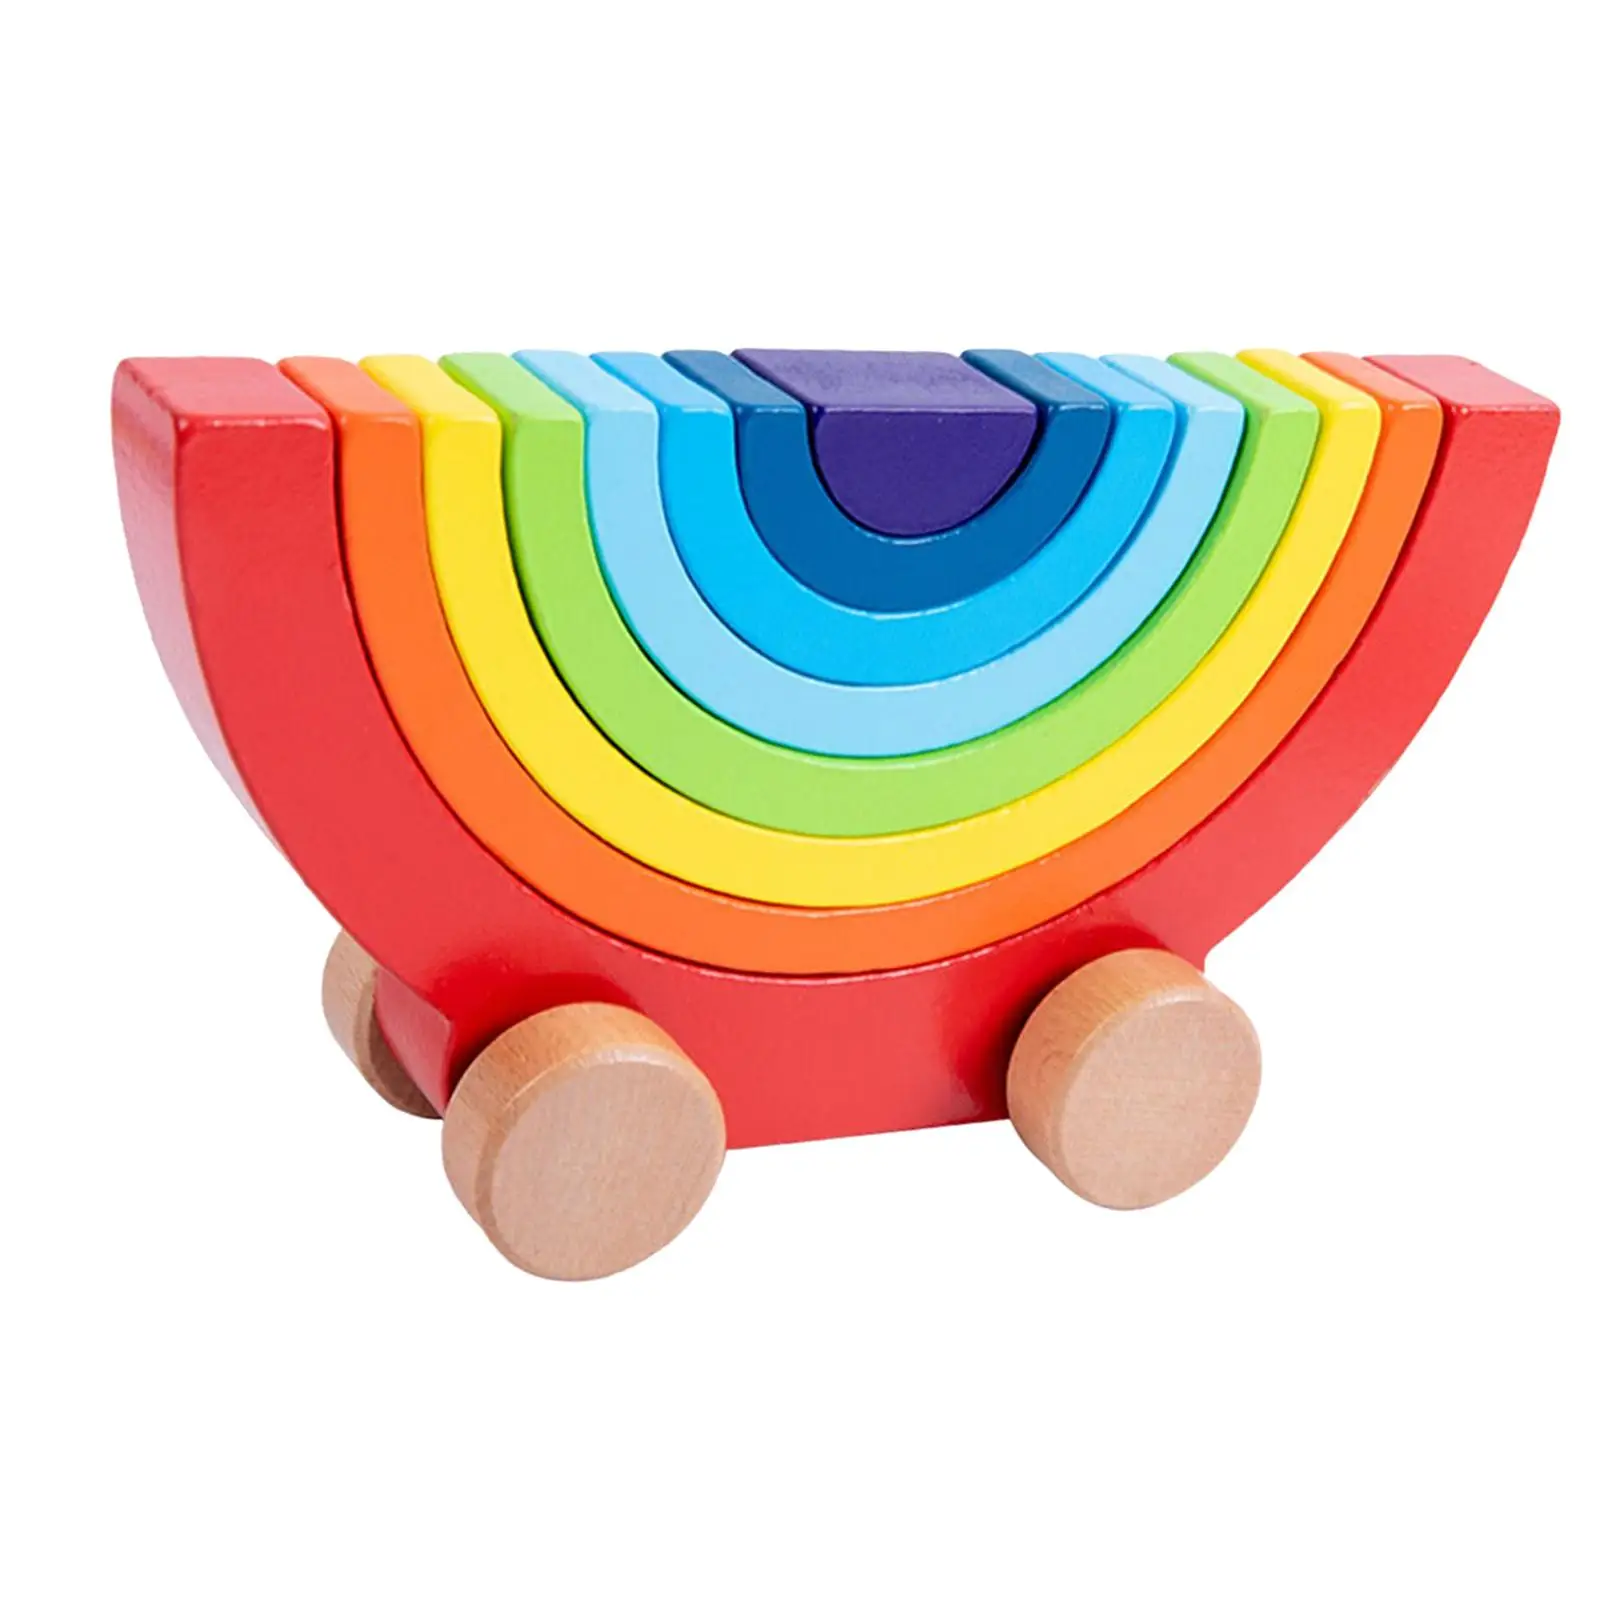 1 Set Wooden Building Blocks Car Toy Stacking Puzzle Gift Development Colorful